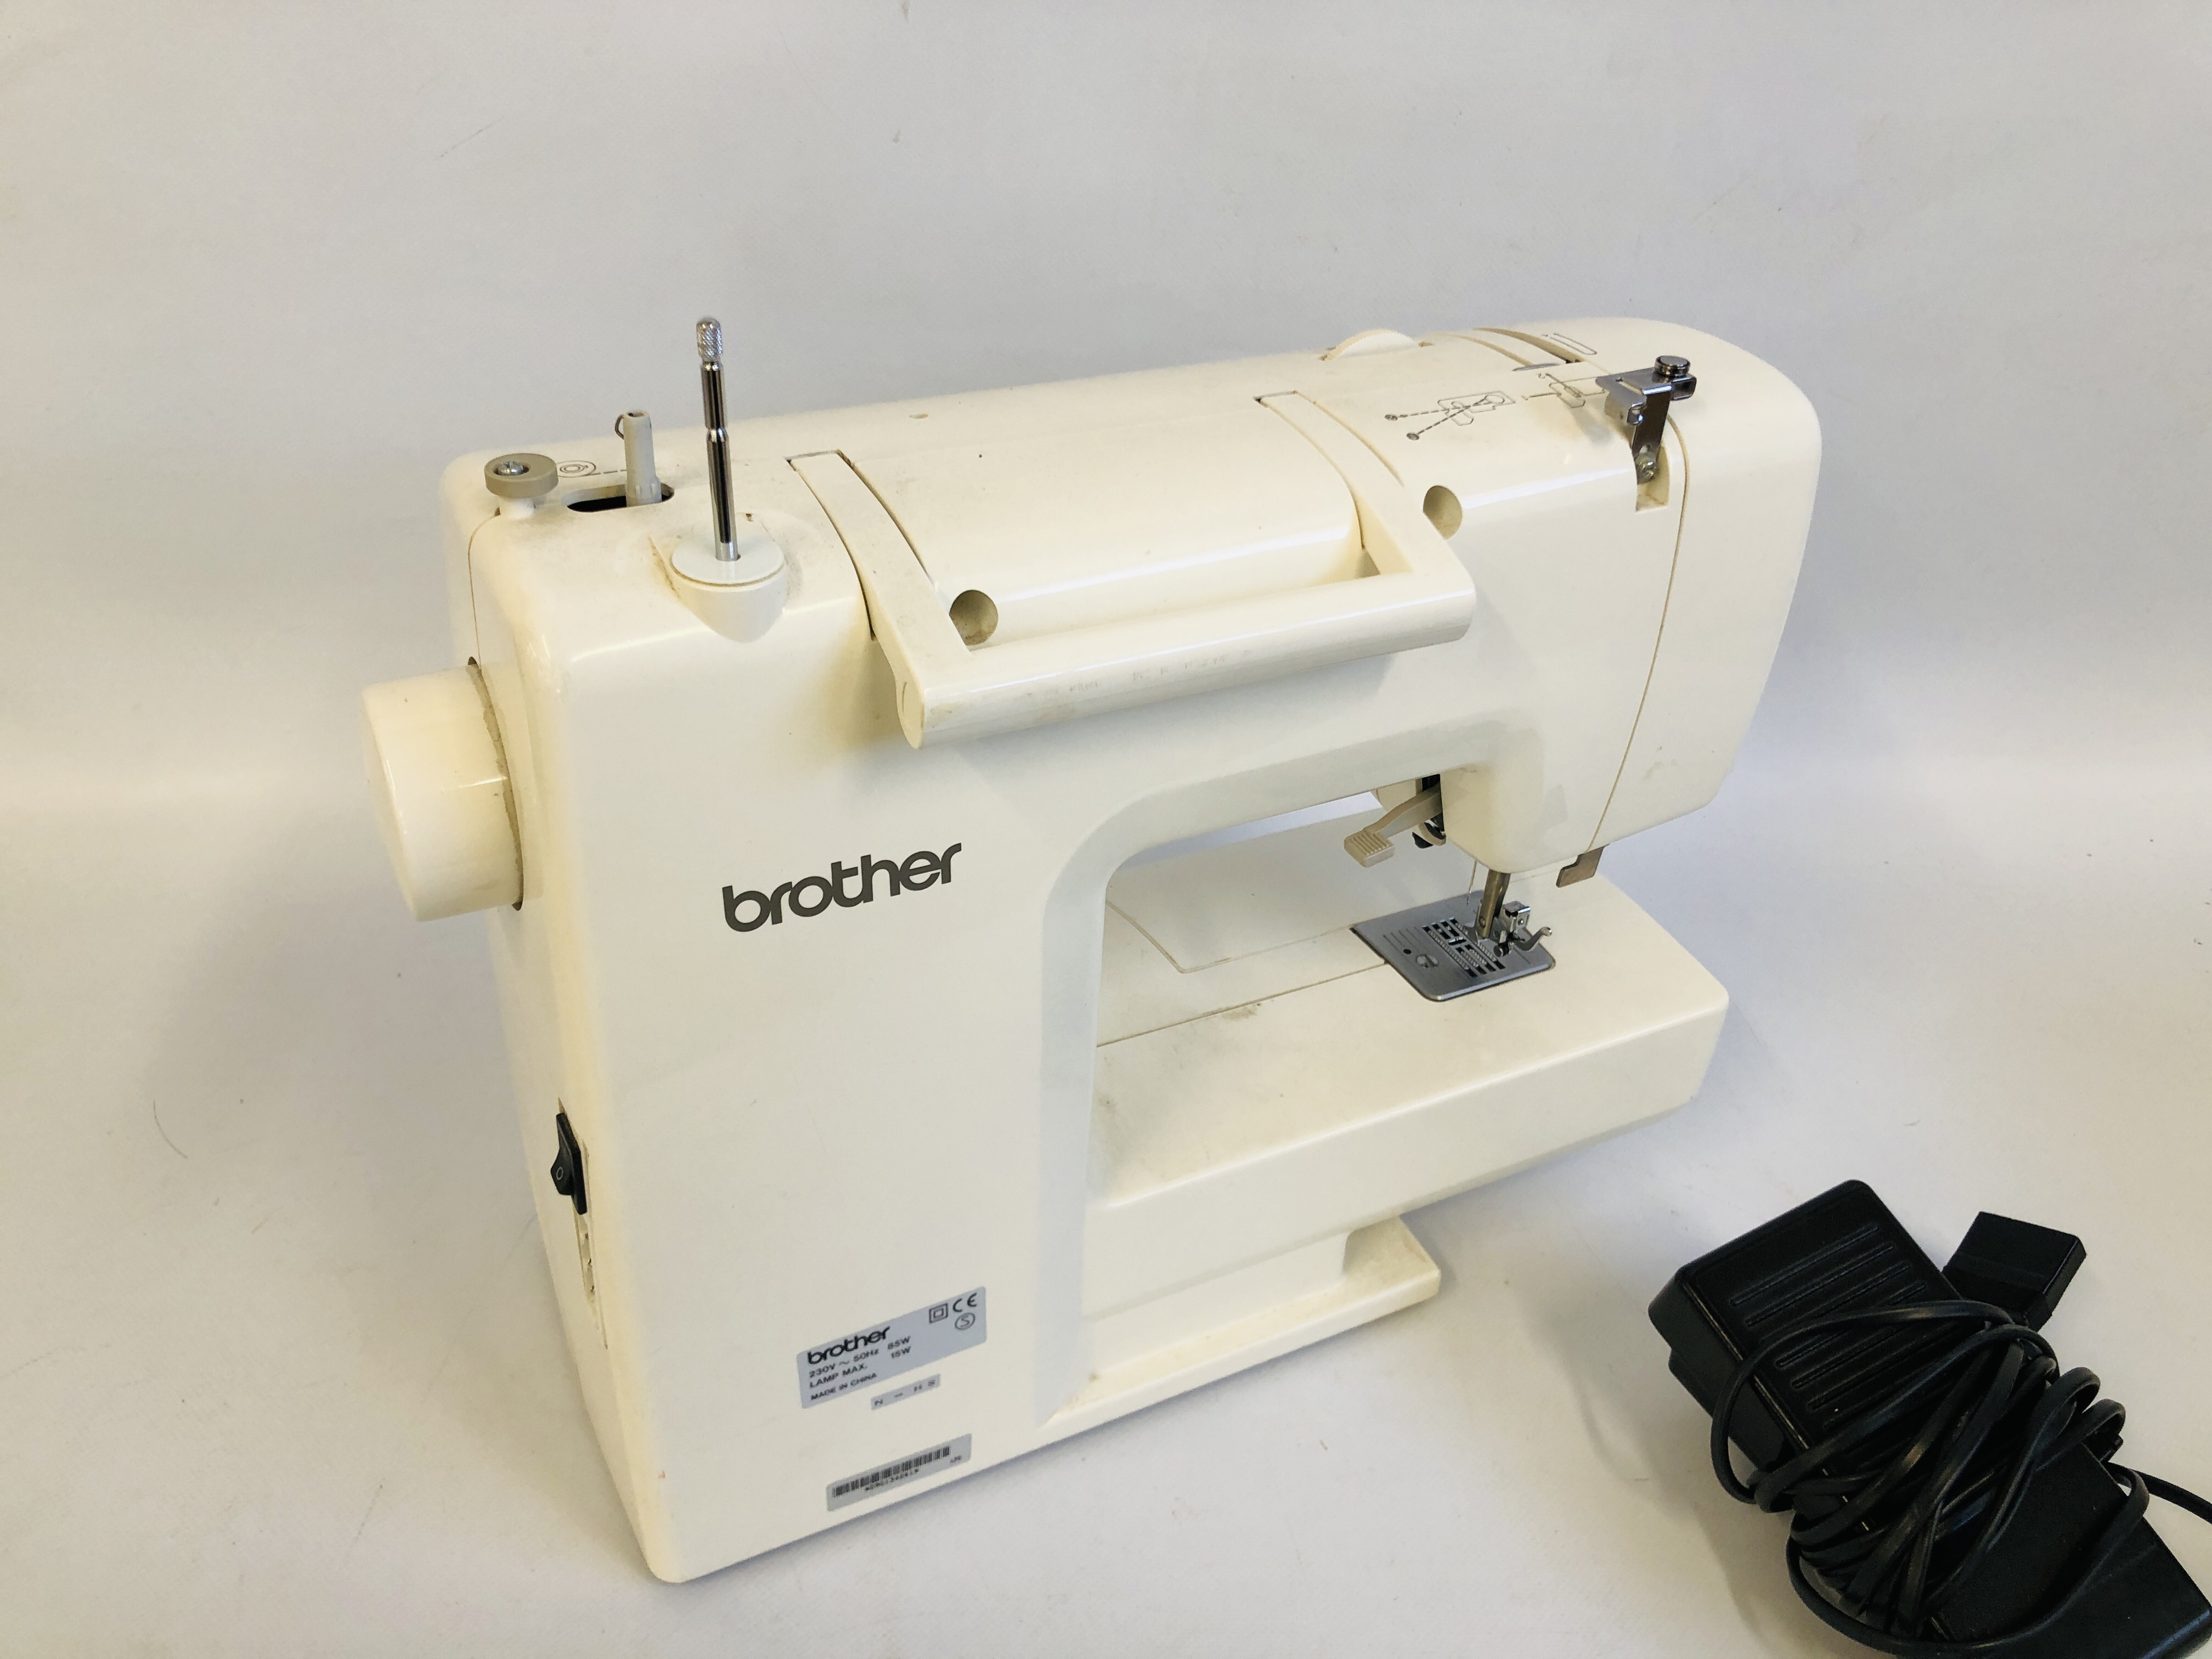 A BROTHERS XL-5021 SEWING MACHINE - SOLD AS SEEN. - Image 4 of 4